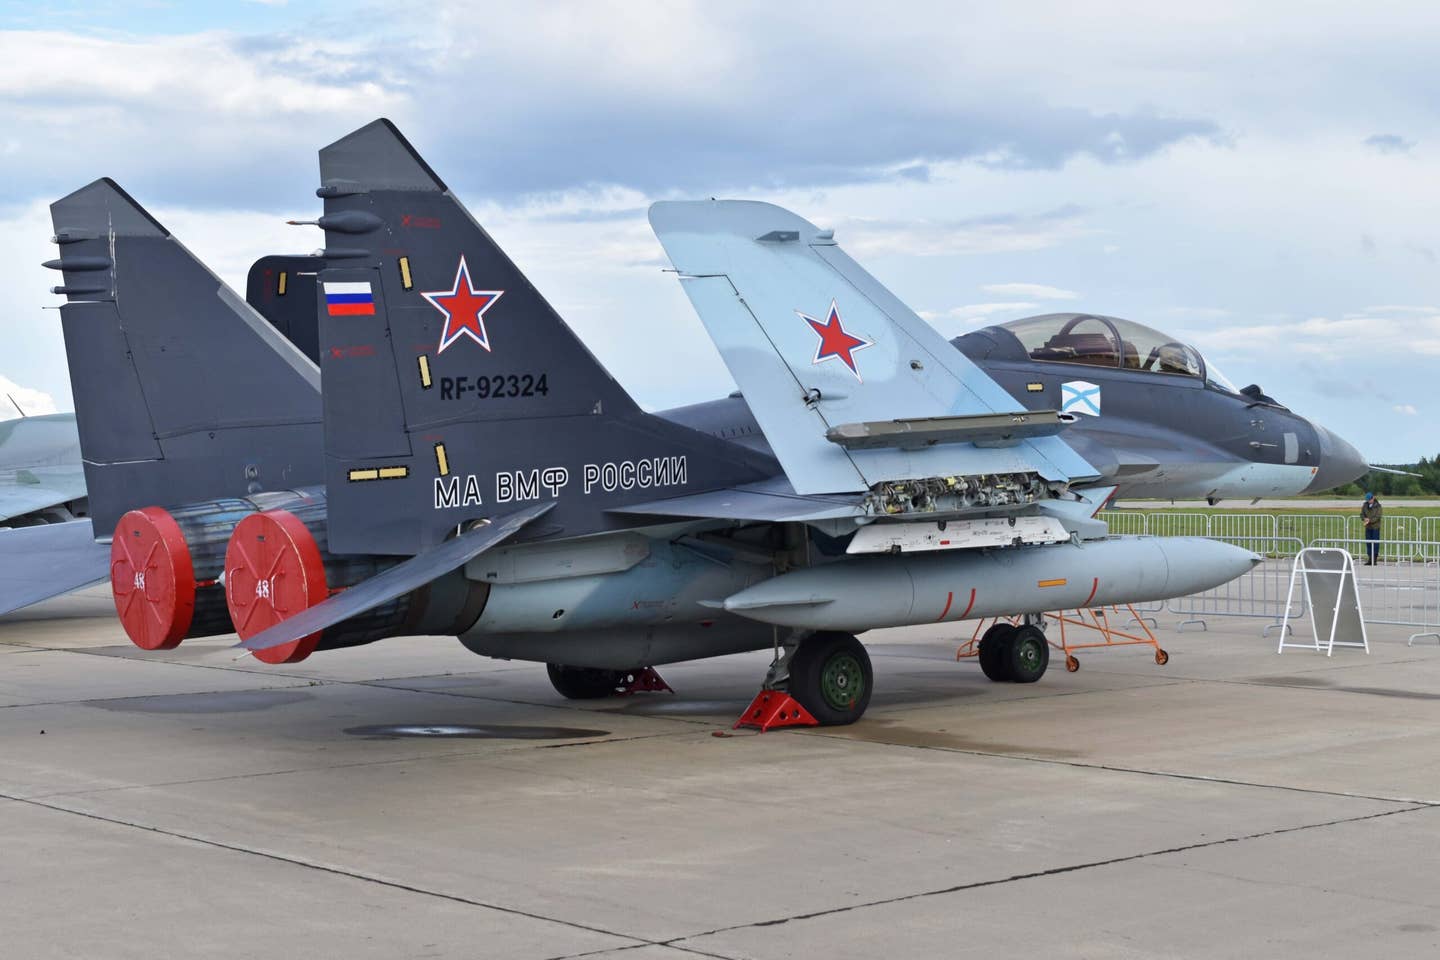 Naval variant of the second generation MiG-29, with the NATO codename ‘Fulcrum-D’. <em>Alan Wilson via Wikimedia Commons, CC-BY-SA-2.0</em>